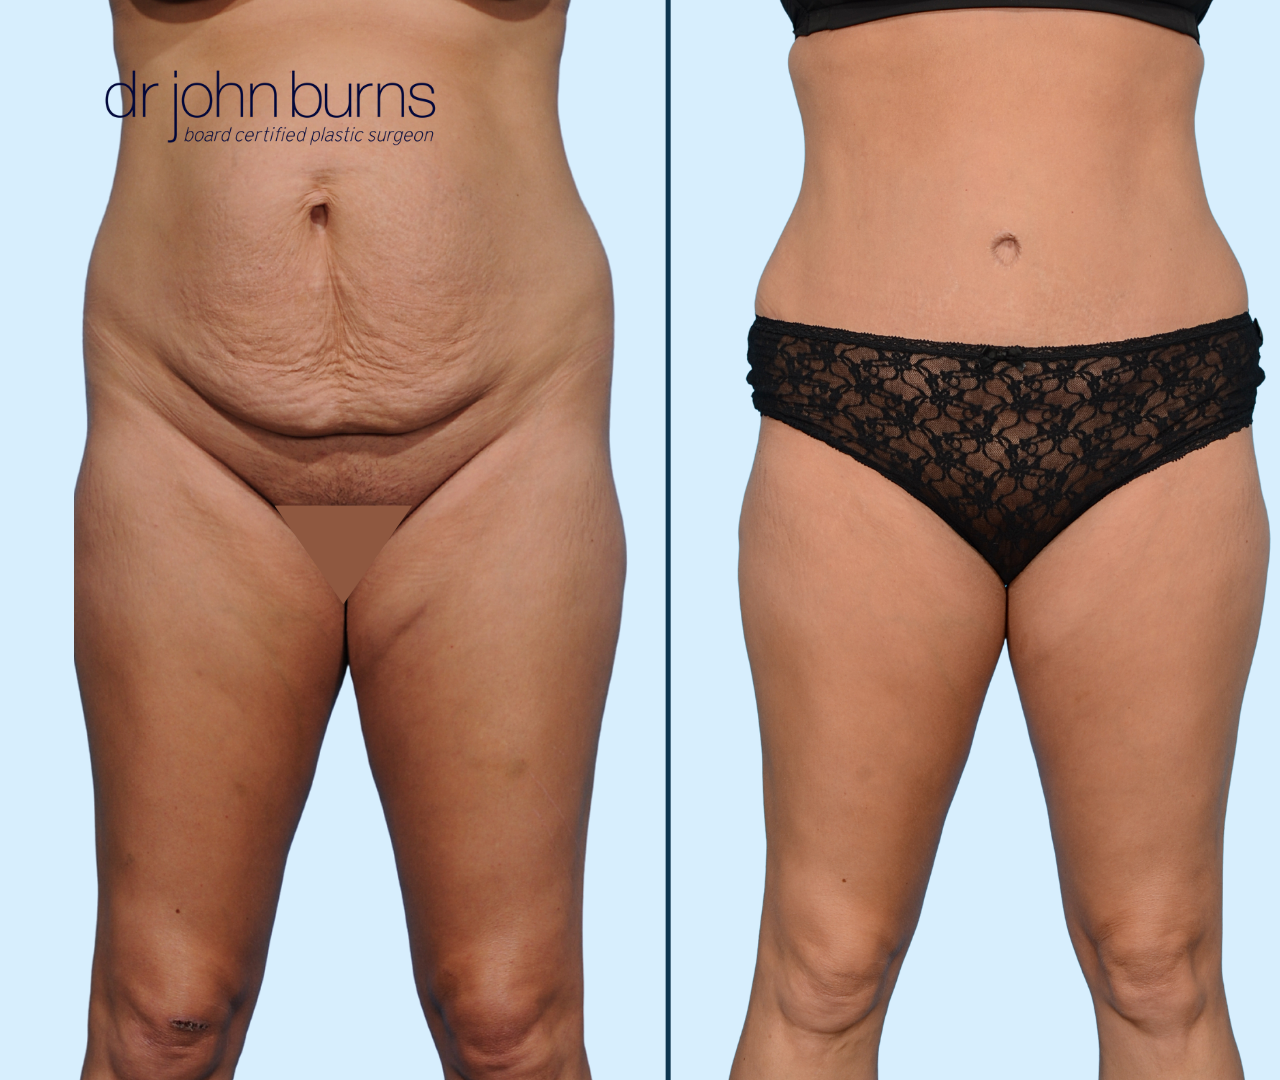 Tummy Tuck Before and After Pictures Case 171